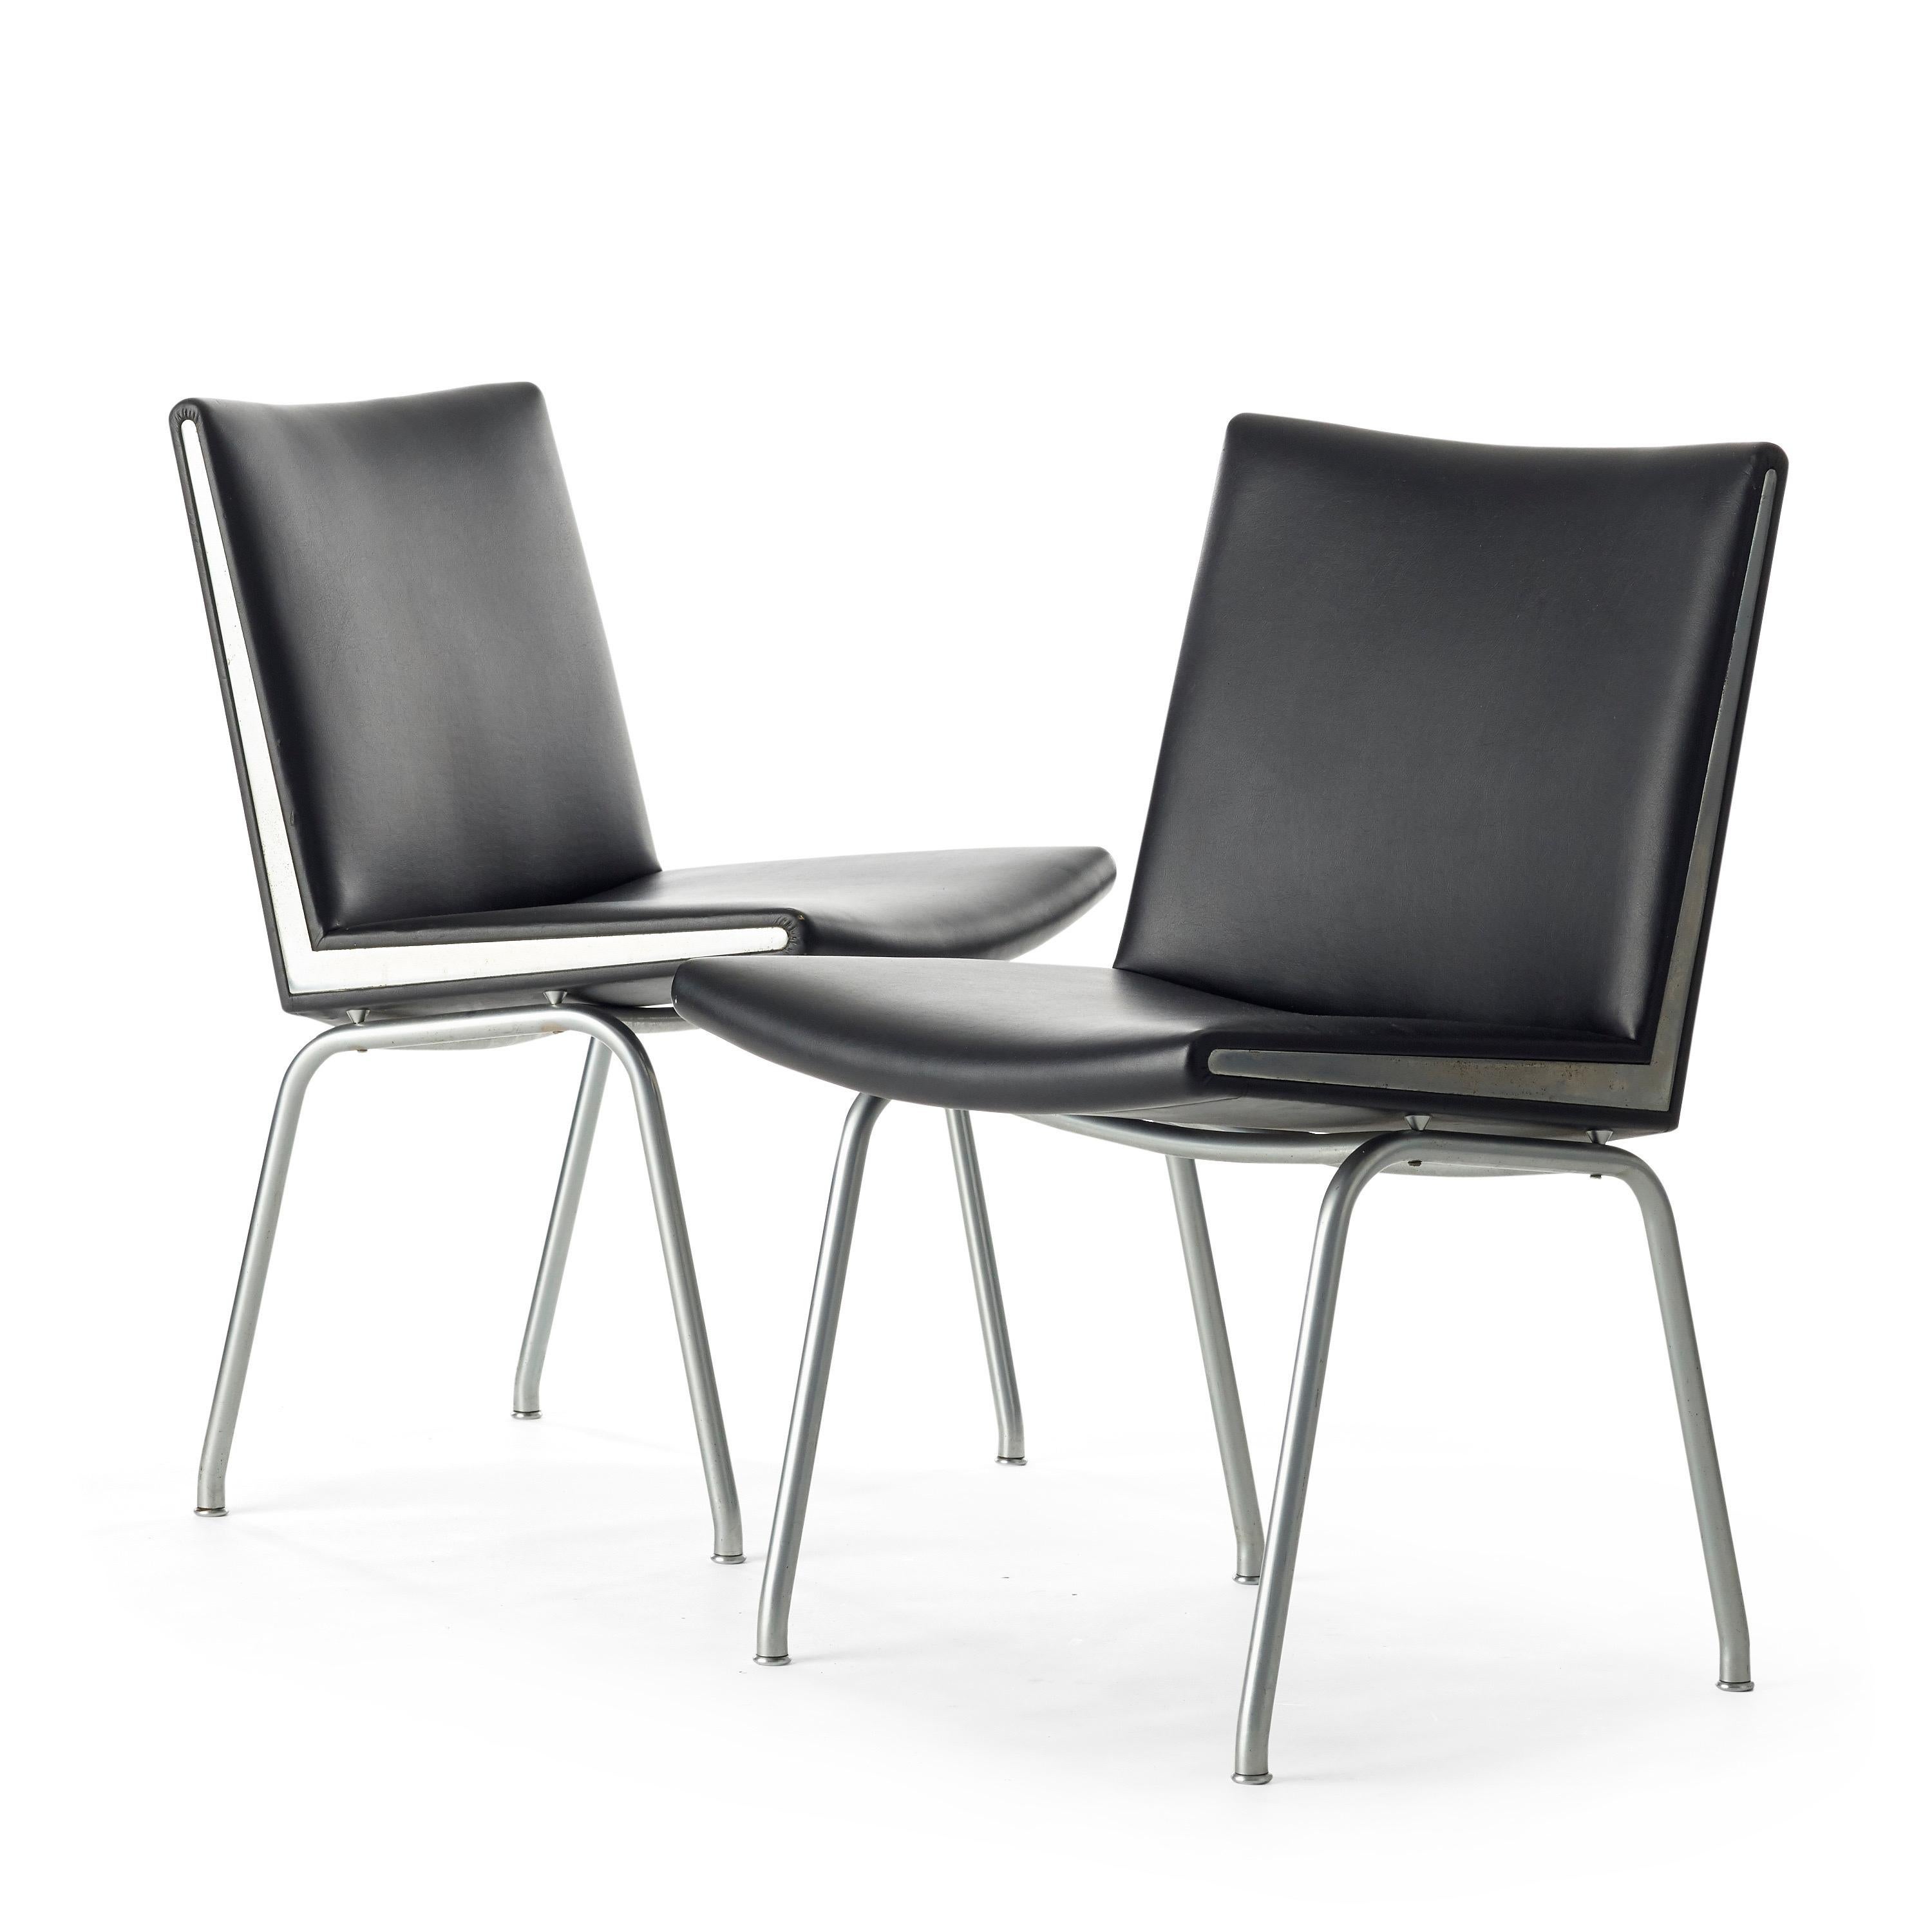 Set of two black vinyl and steel Kastrup chairs by Hans Wegner made by A.P. Stolen, circa 1950s

Also known as the Airport chair

Each measures 32.25” high, 19.75” wide and 19.75” deep, seat is 17.25” high

In good vintage condition with some